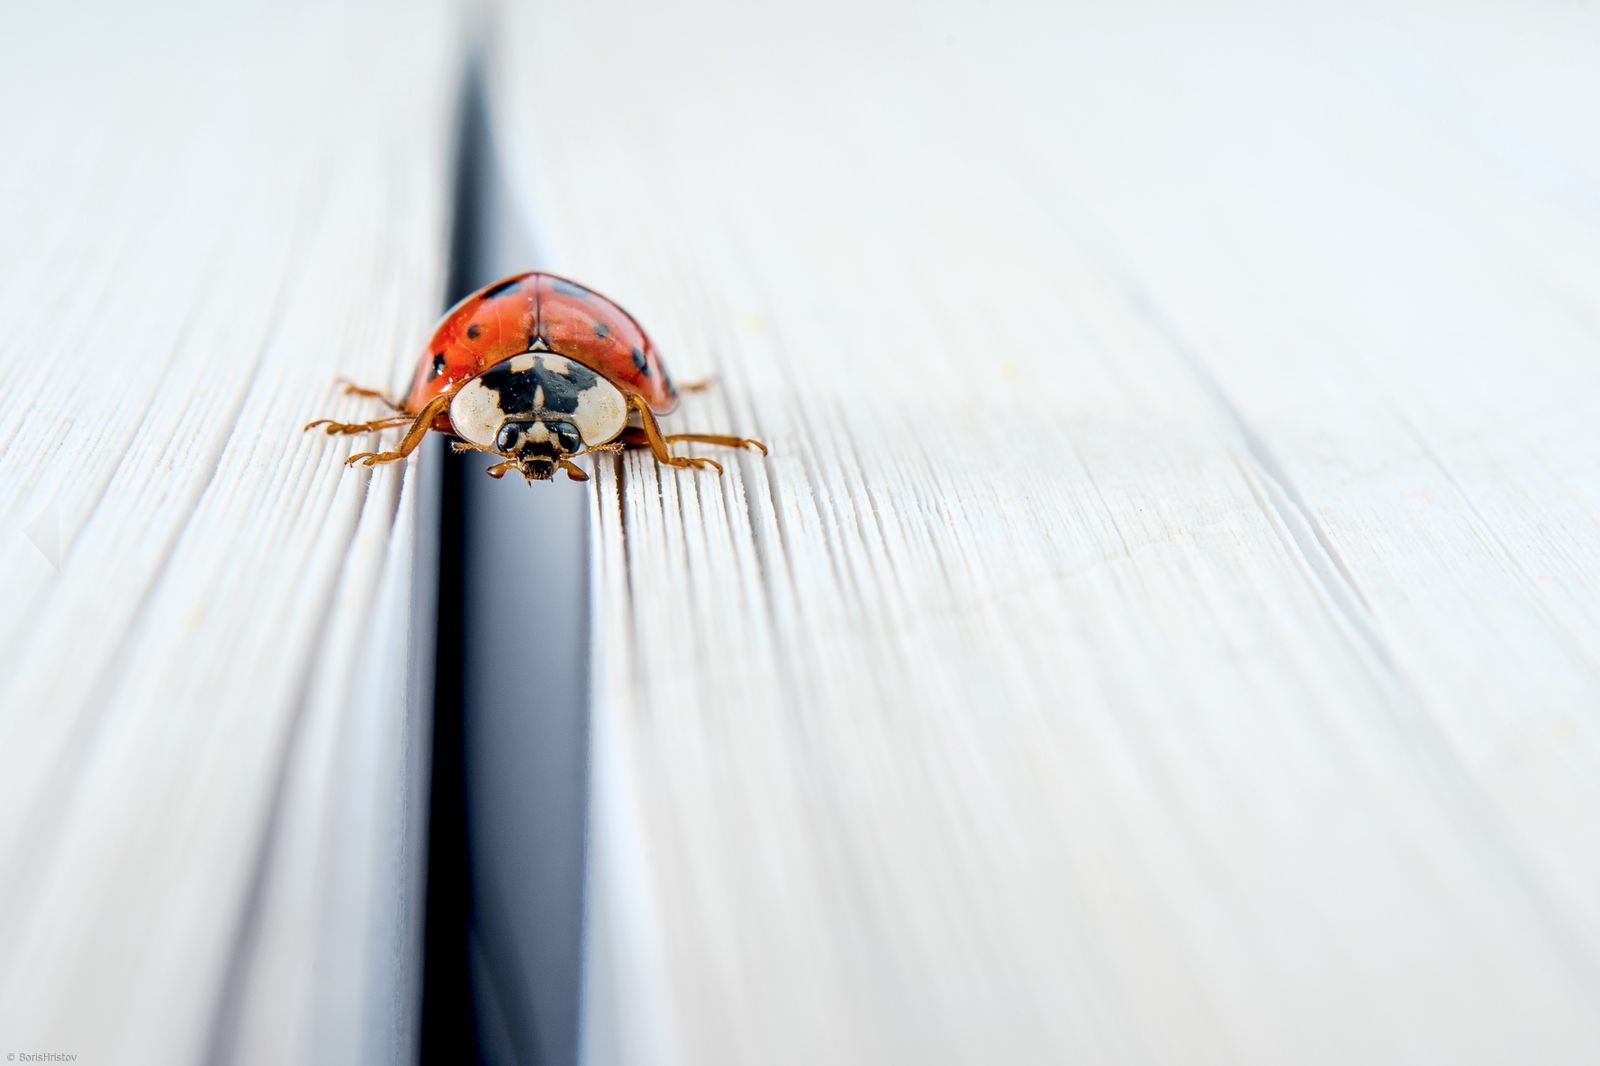 Just don't turn around.) - ladybug, Macro, Photo, Insects, Paper, From the network, Macro photography